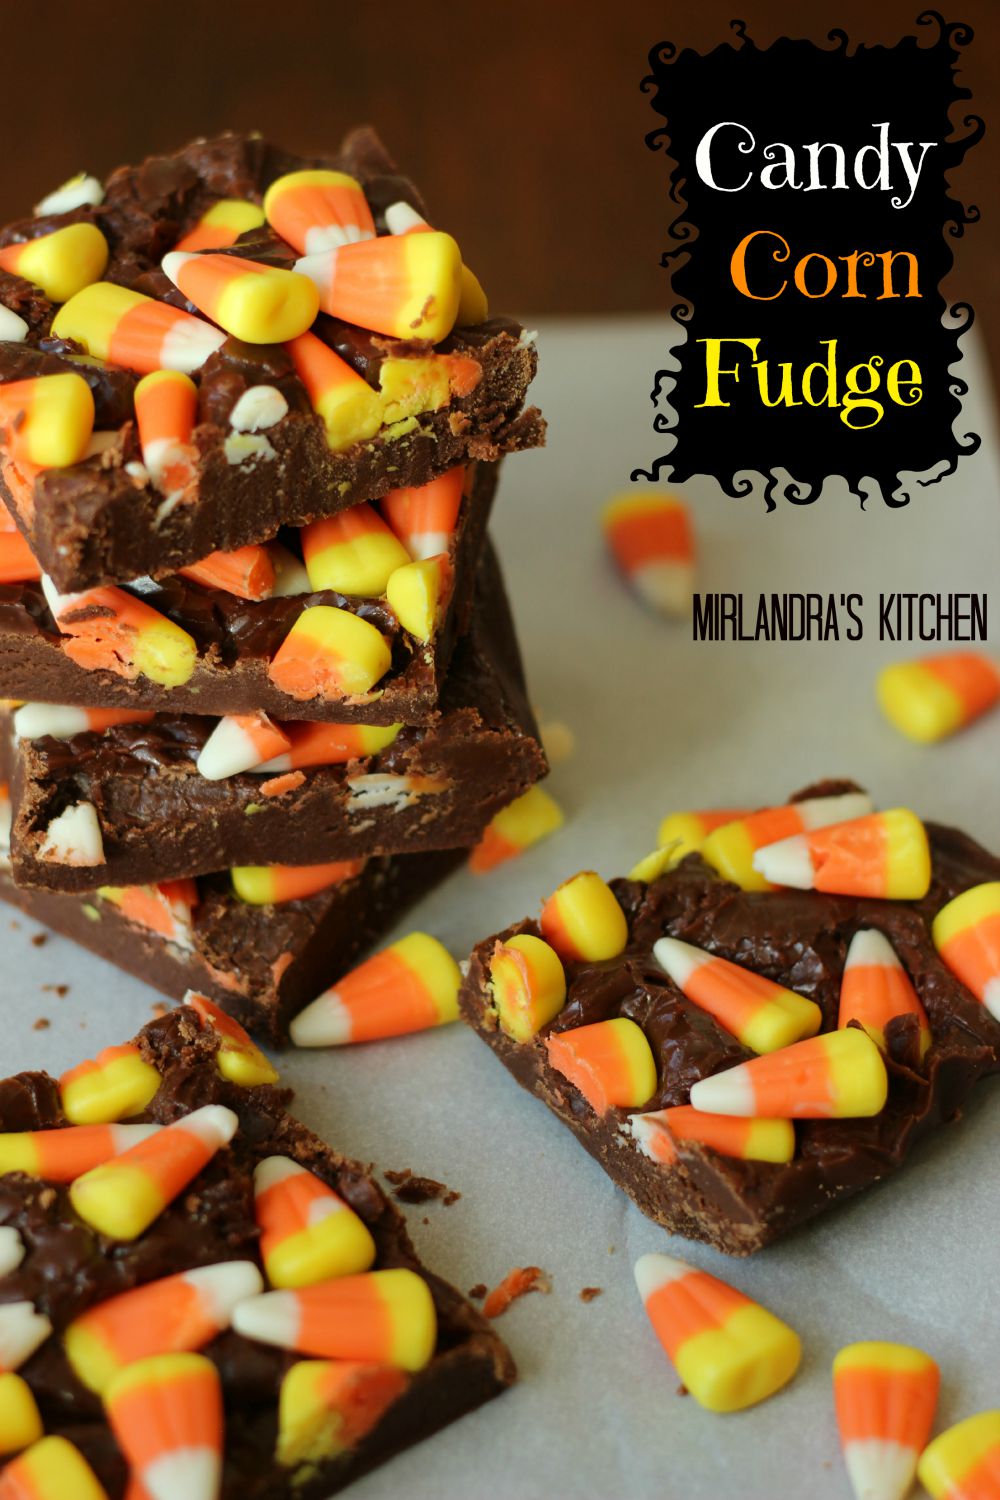 Candy Corn Fudge is a fun fall treat with a no fail fudge recipe behind it. You just can't beat the taste of fresh fudge with candy corn in it! This is a kid friendly project that only takes a few minutes. 